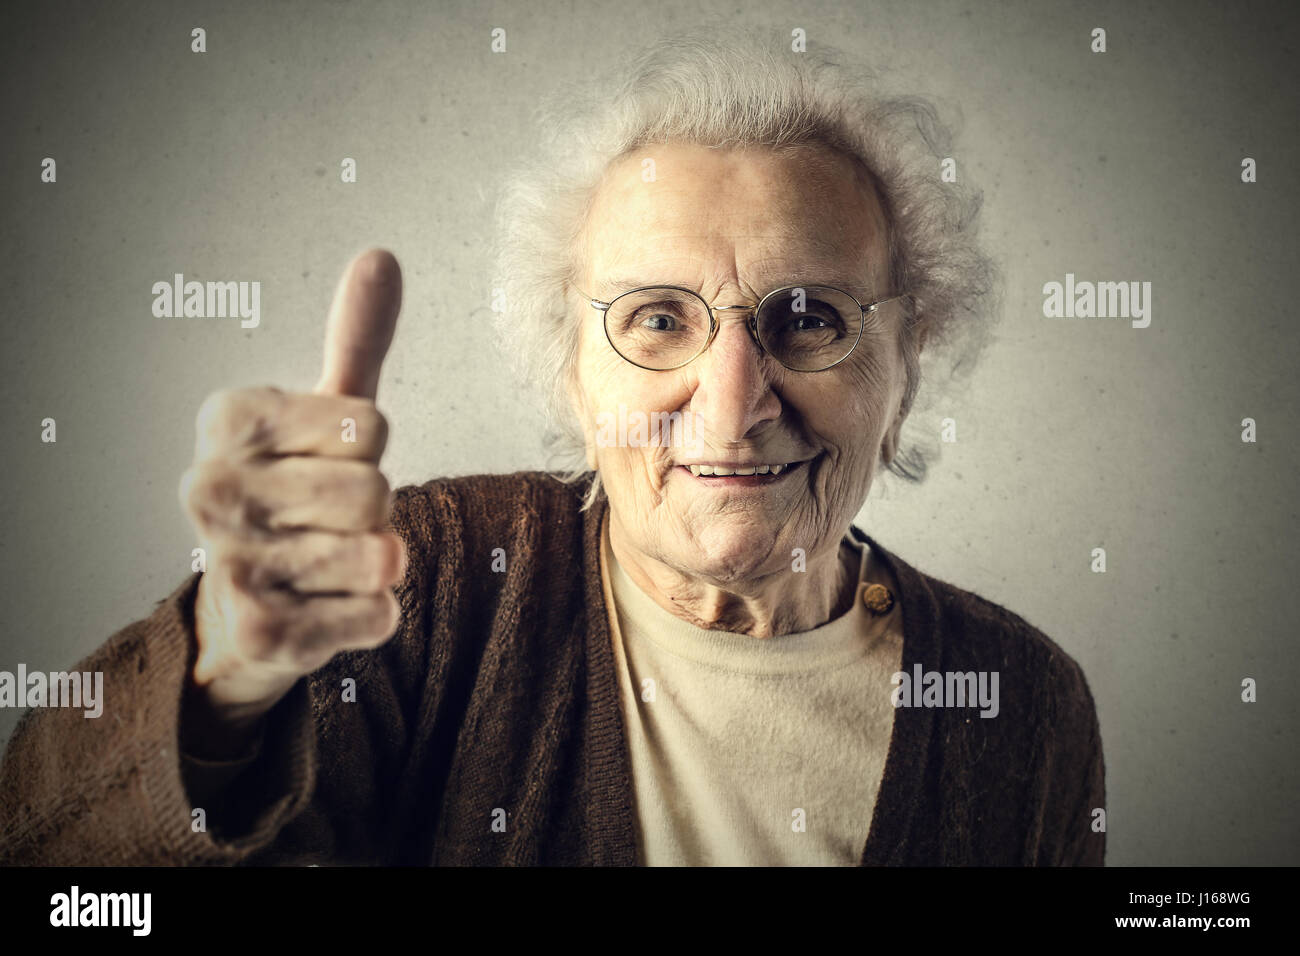 Old lady with glasses showing like sign Stock Photo